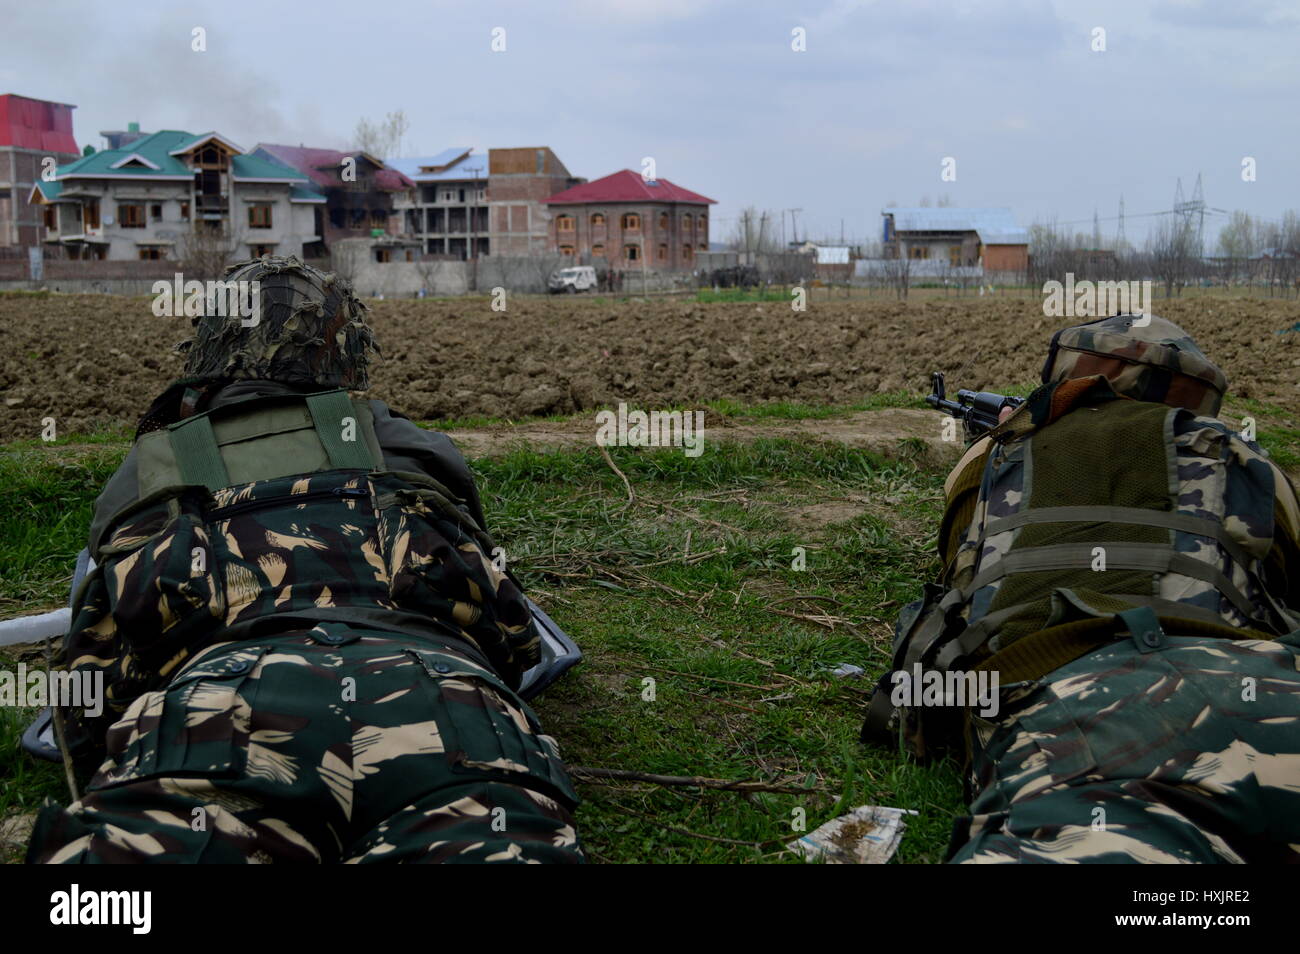 Srinagar, Kashmir. 28th Mar, 2017. Three civilians were killed and 17 others injured on Tuesday during an encounter between security forces and militant Rebal in Chadoora area of central Kashmir's Budgam district. The civilians died during clashes with security personnel at the site of the encounter. Credit: PACIFIC PRESS/Alamy Live News Stock Photo